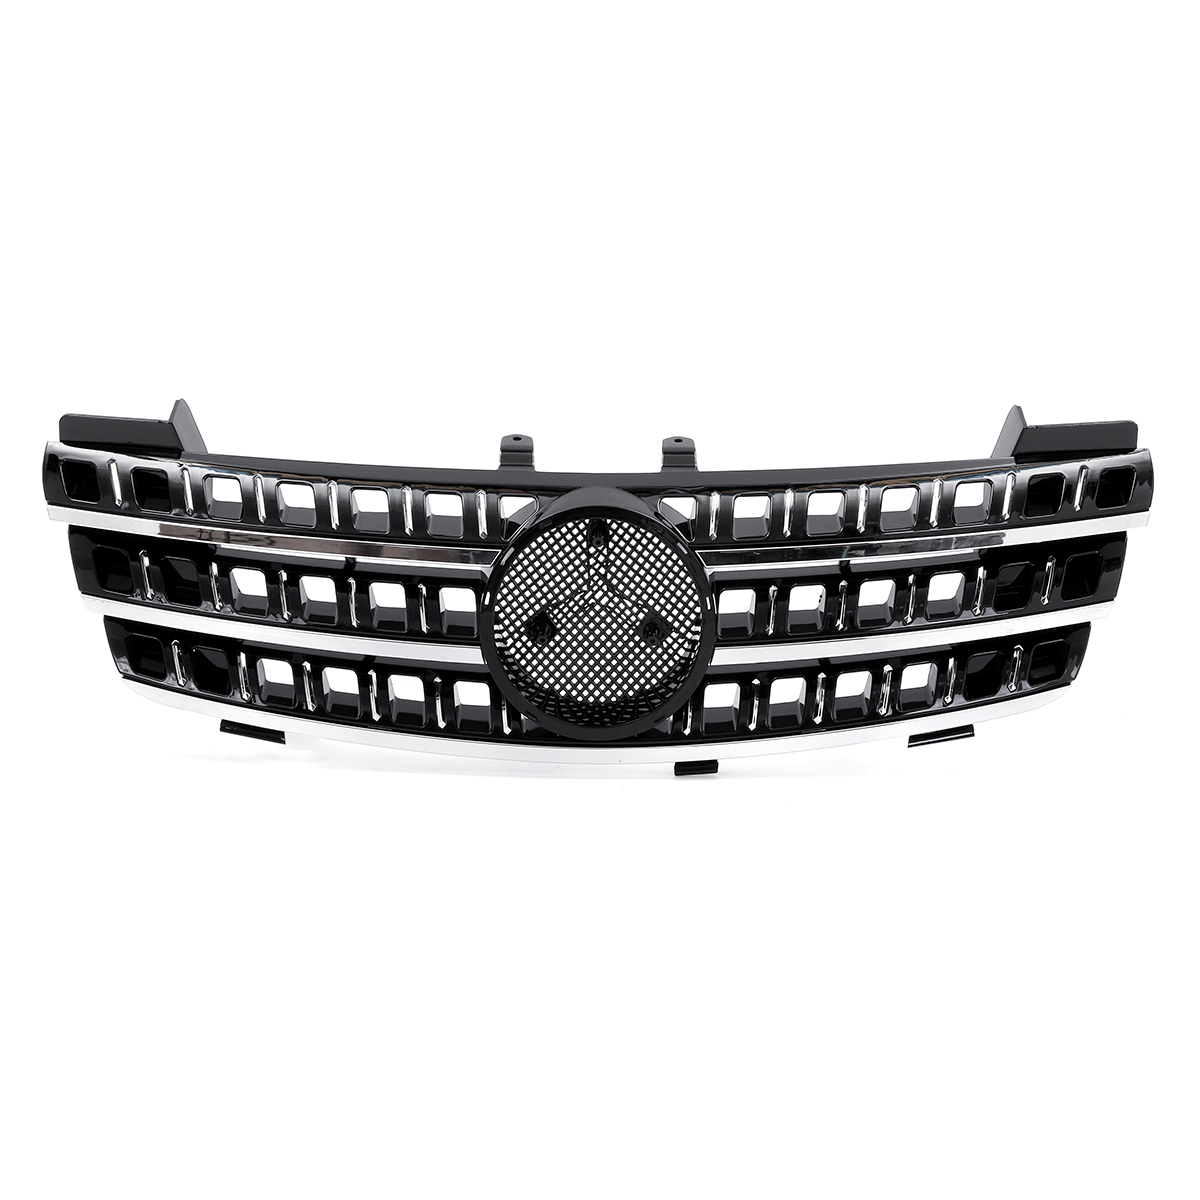 

Glossy Front Hood Grill Grille For Mercedes Benz ML Class W164 ML320 ML350 ML550 2005-2008